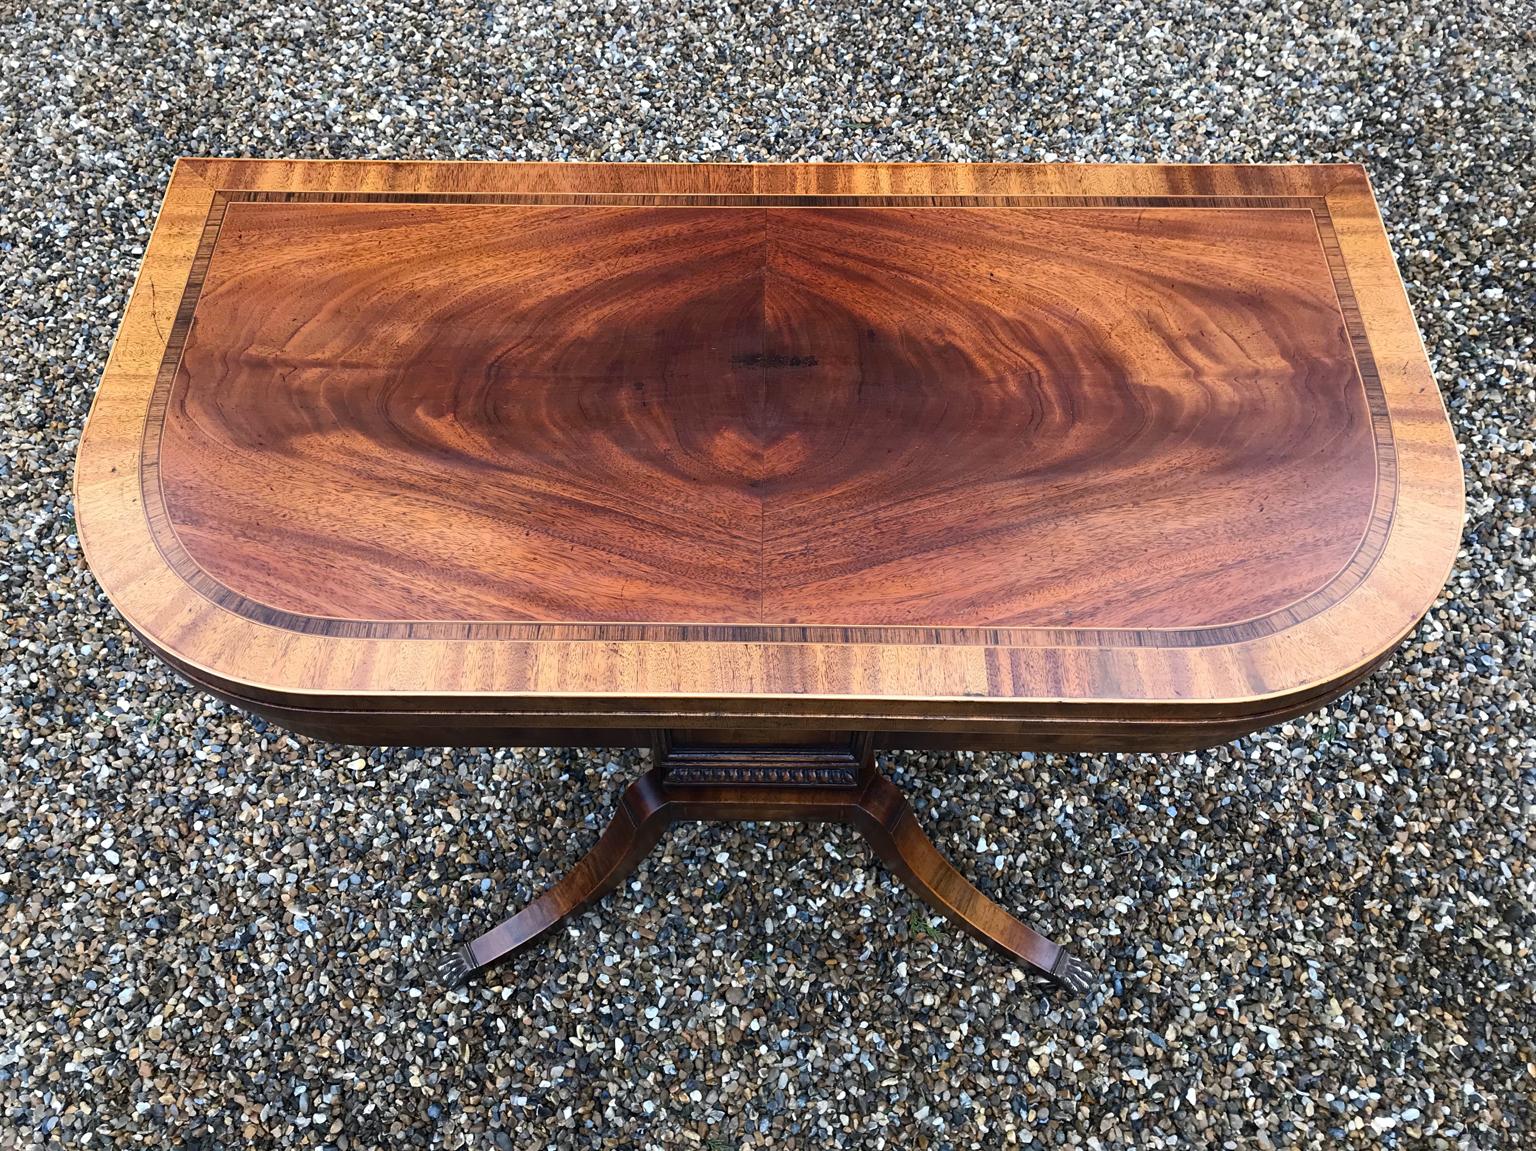 19th Century Regency Mahogany Inlaid Crossbanded Card Table with Splayed Legs In Good Condition In Richmond, London, Surrey